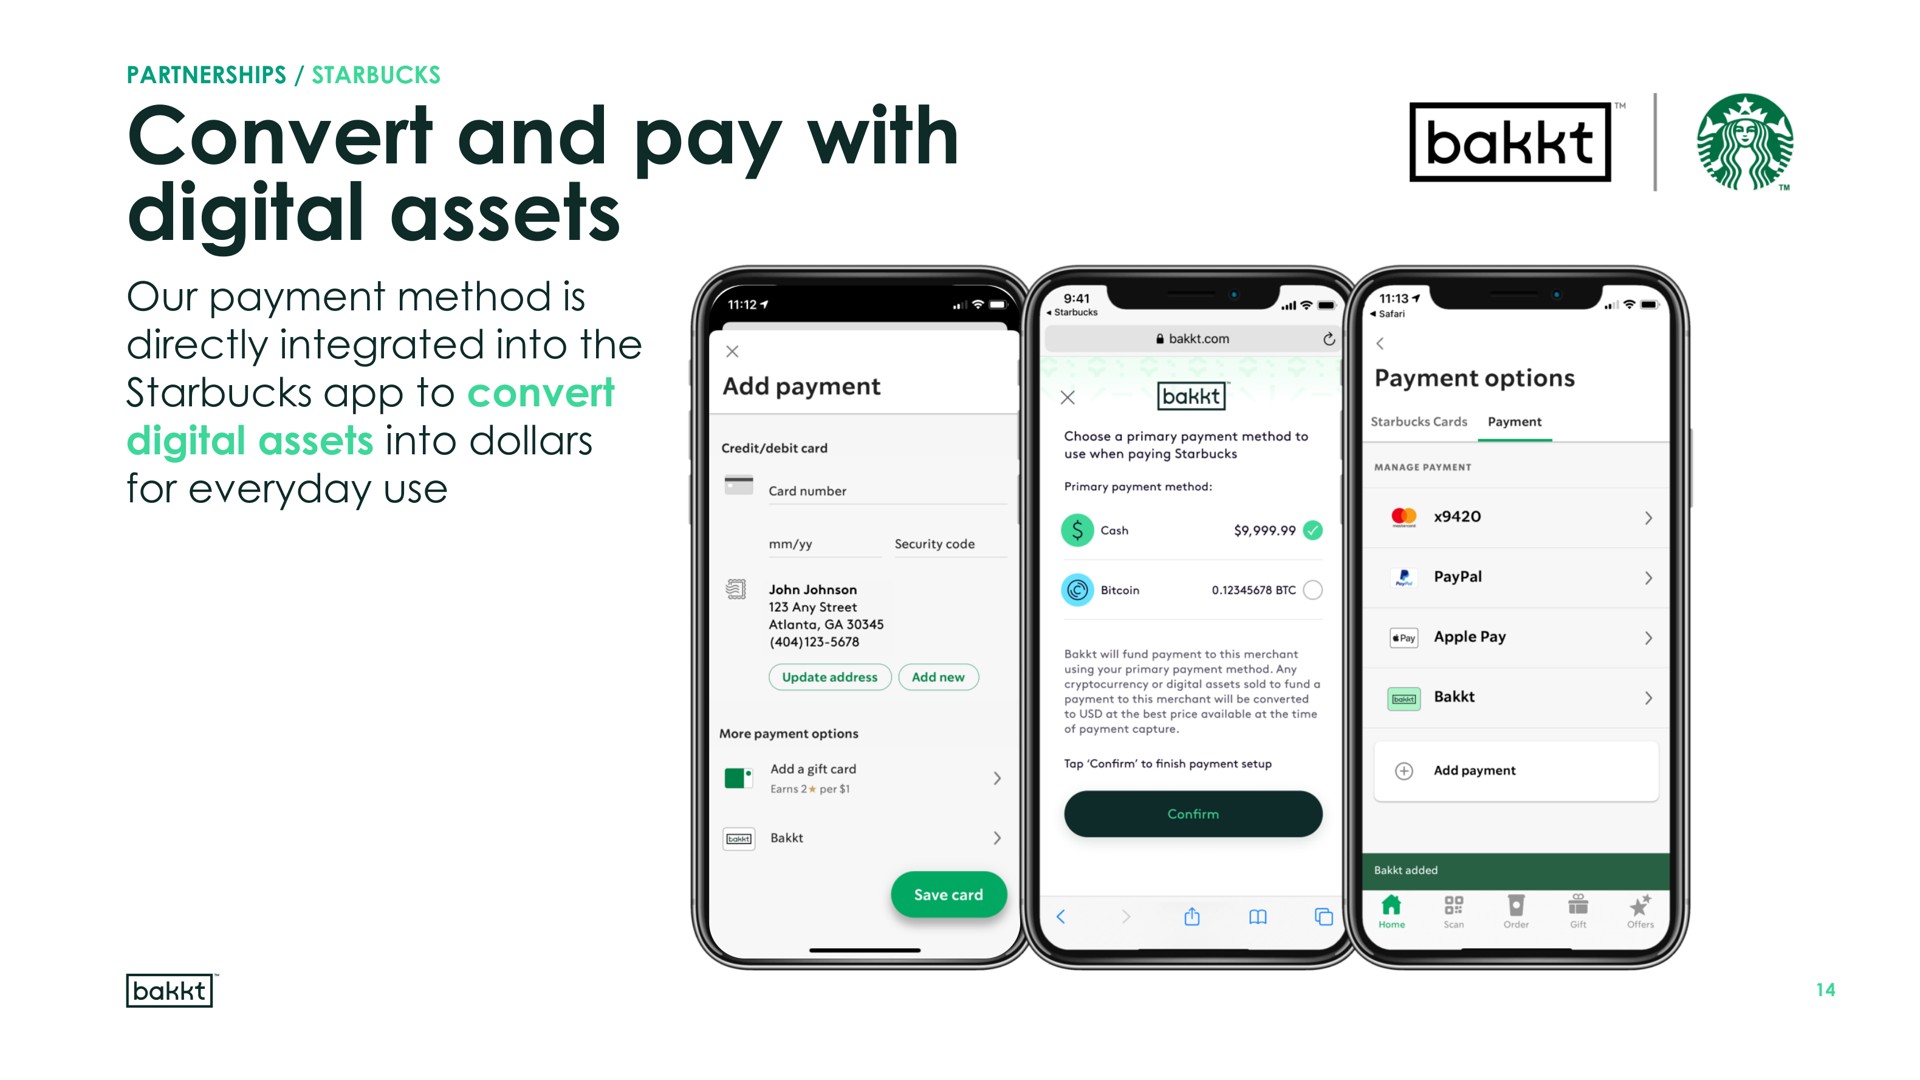 convert and pay with digital assets | Bakkt